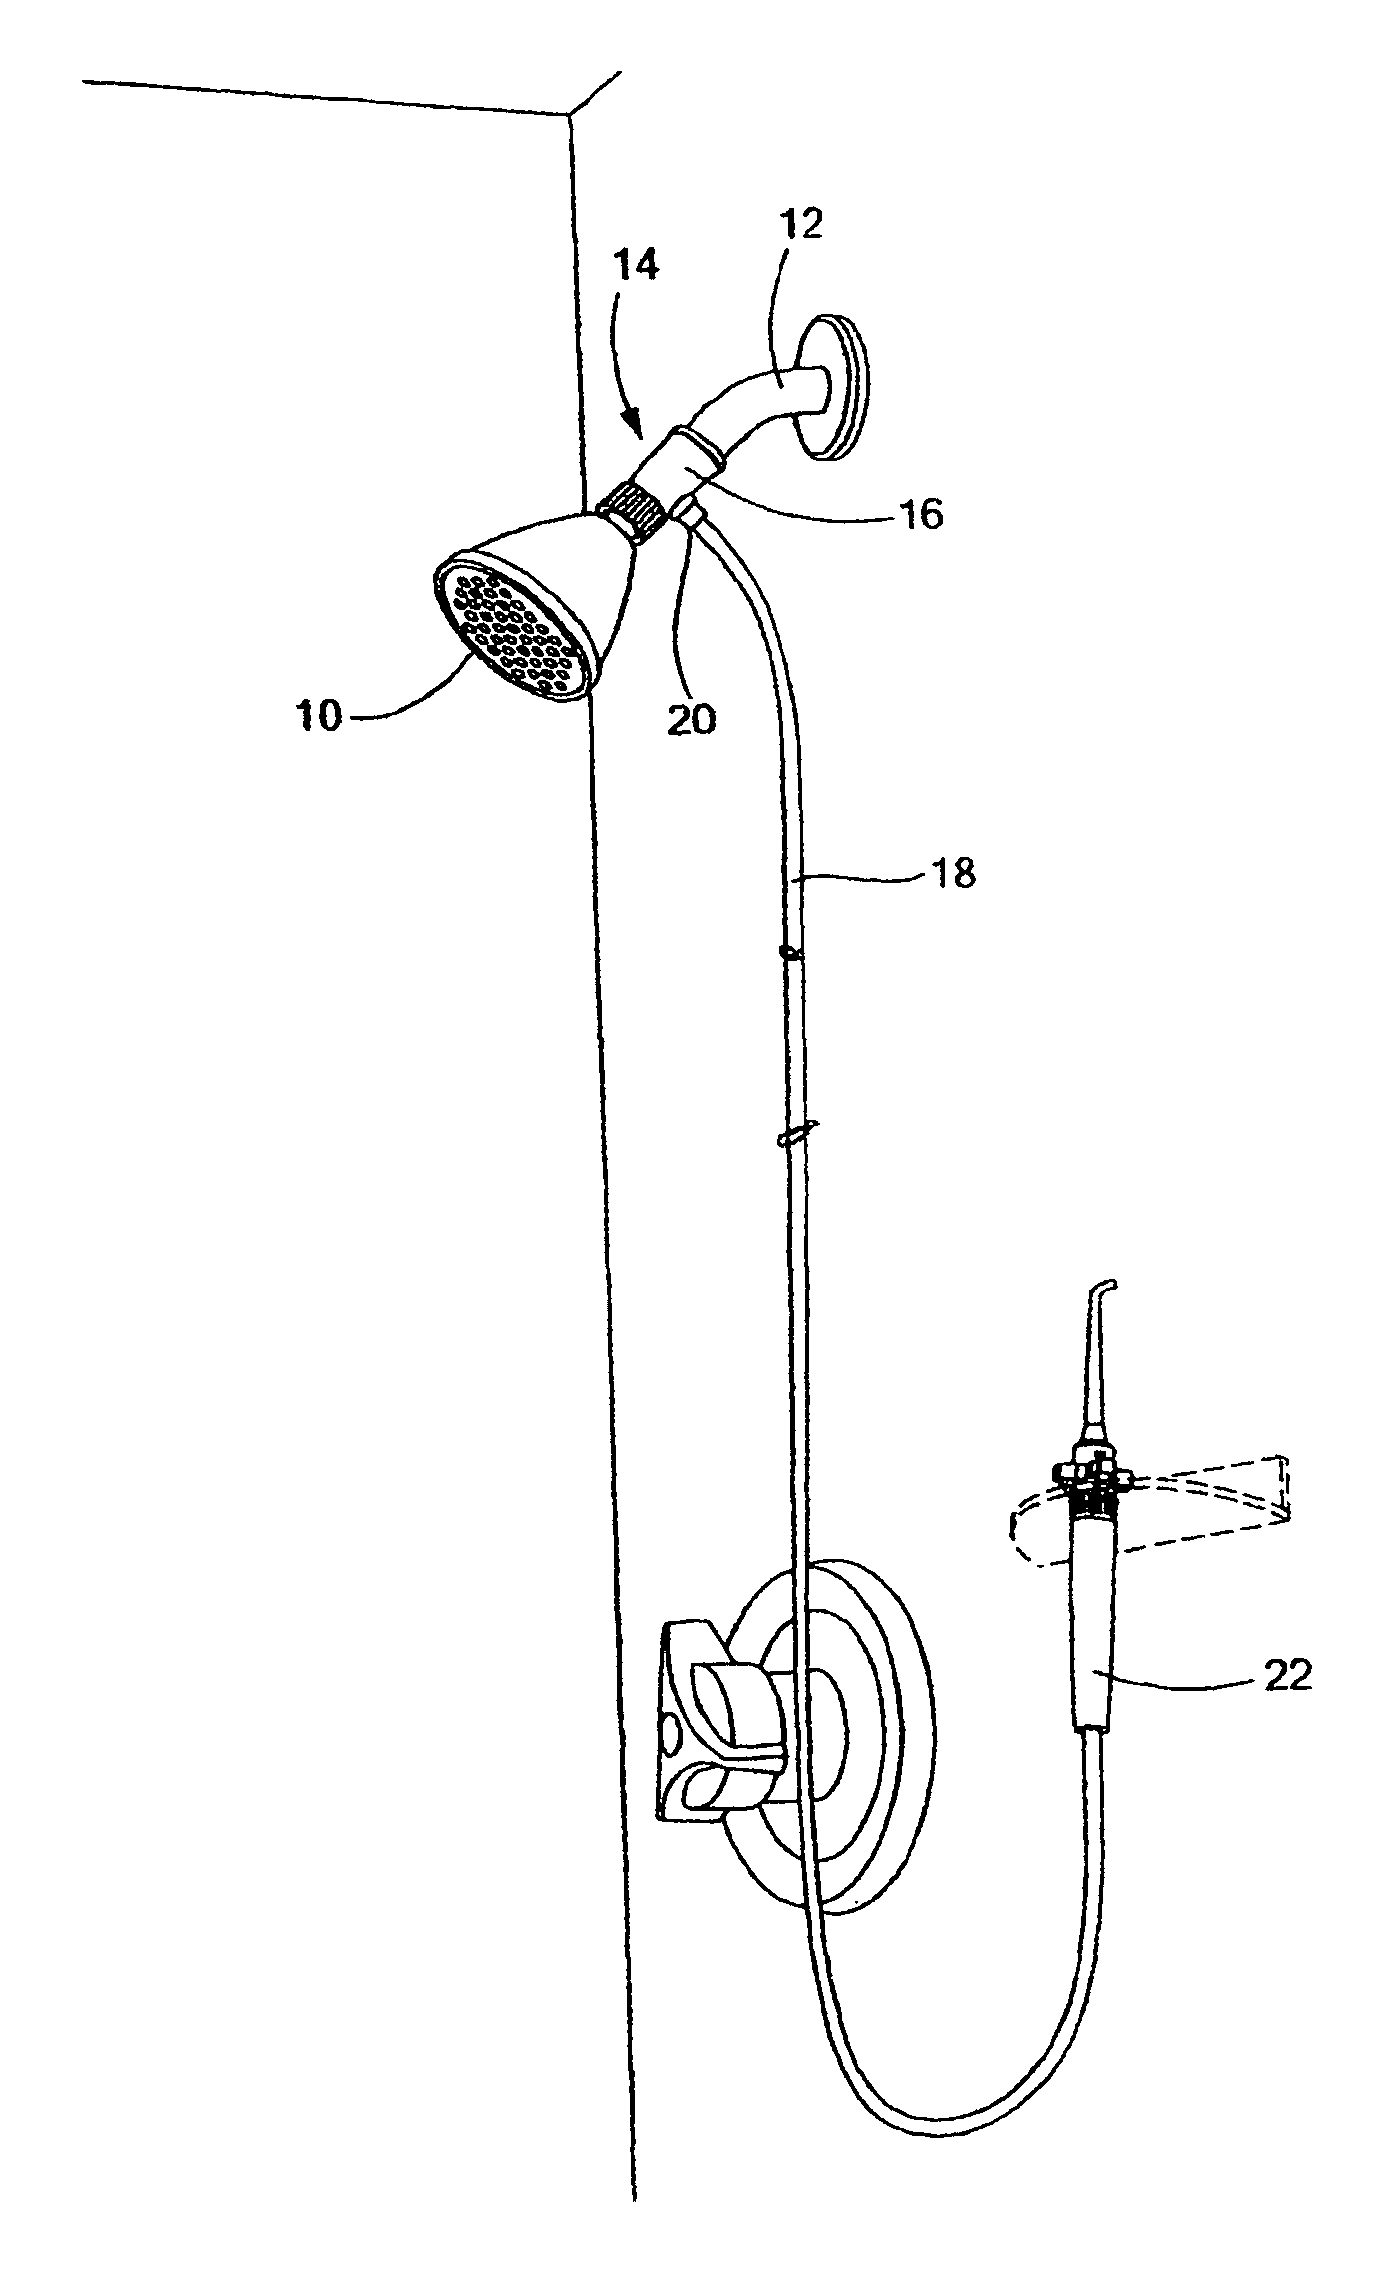 Shower head attachment for mixing liquids used to clean teeth